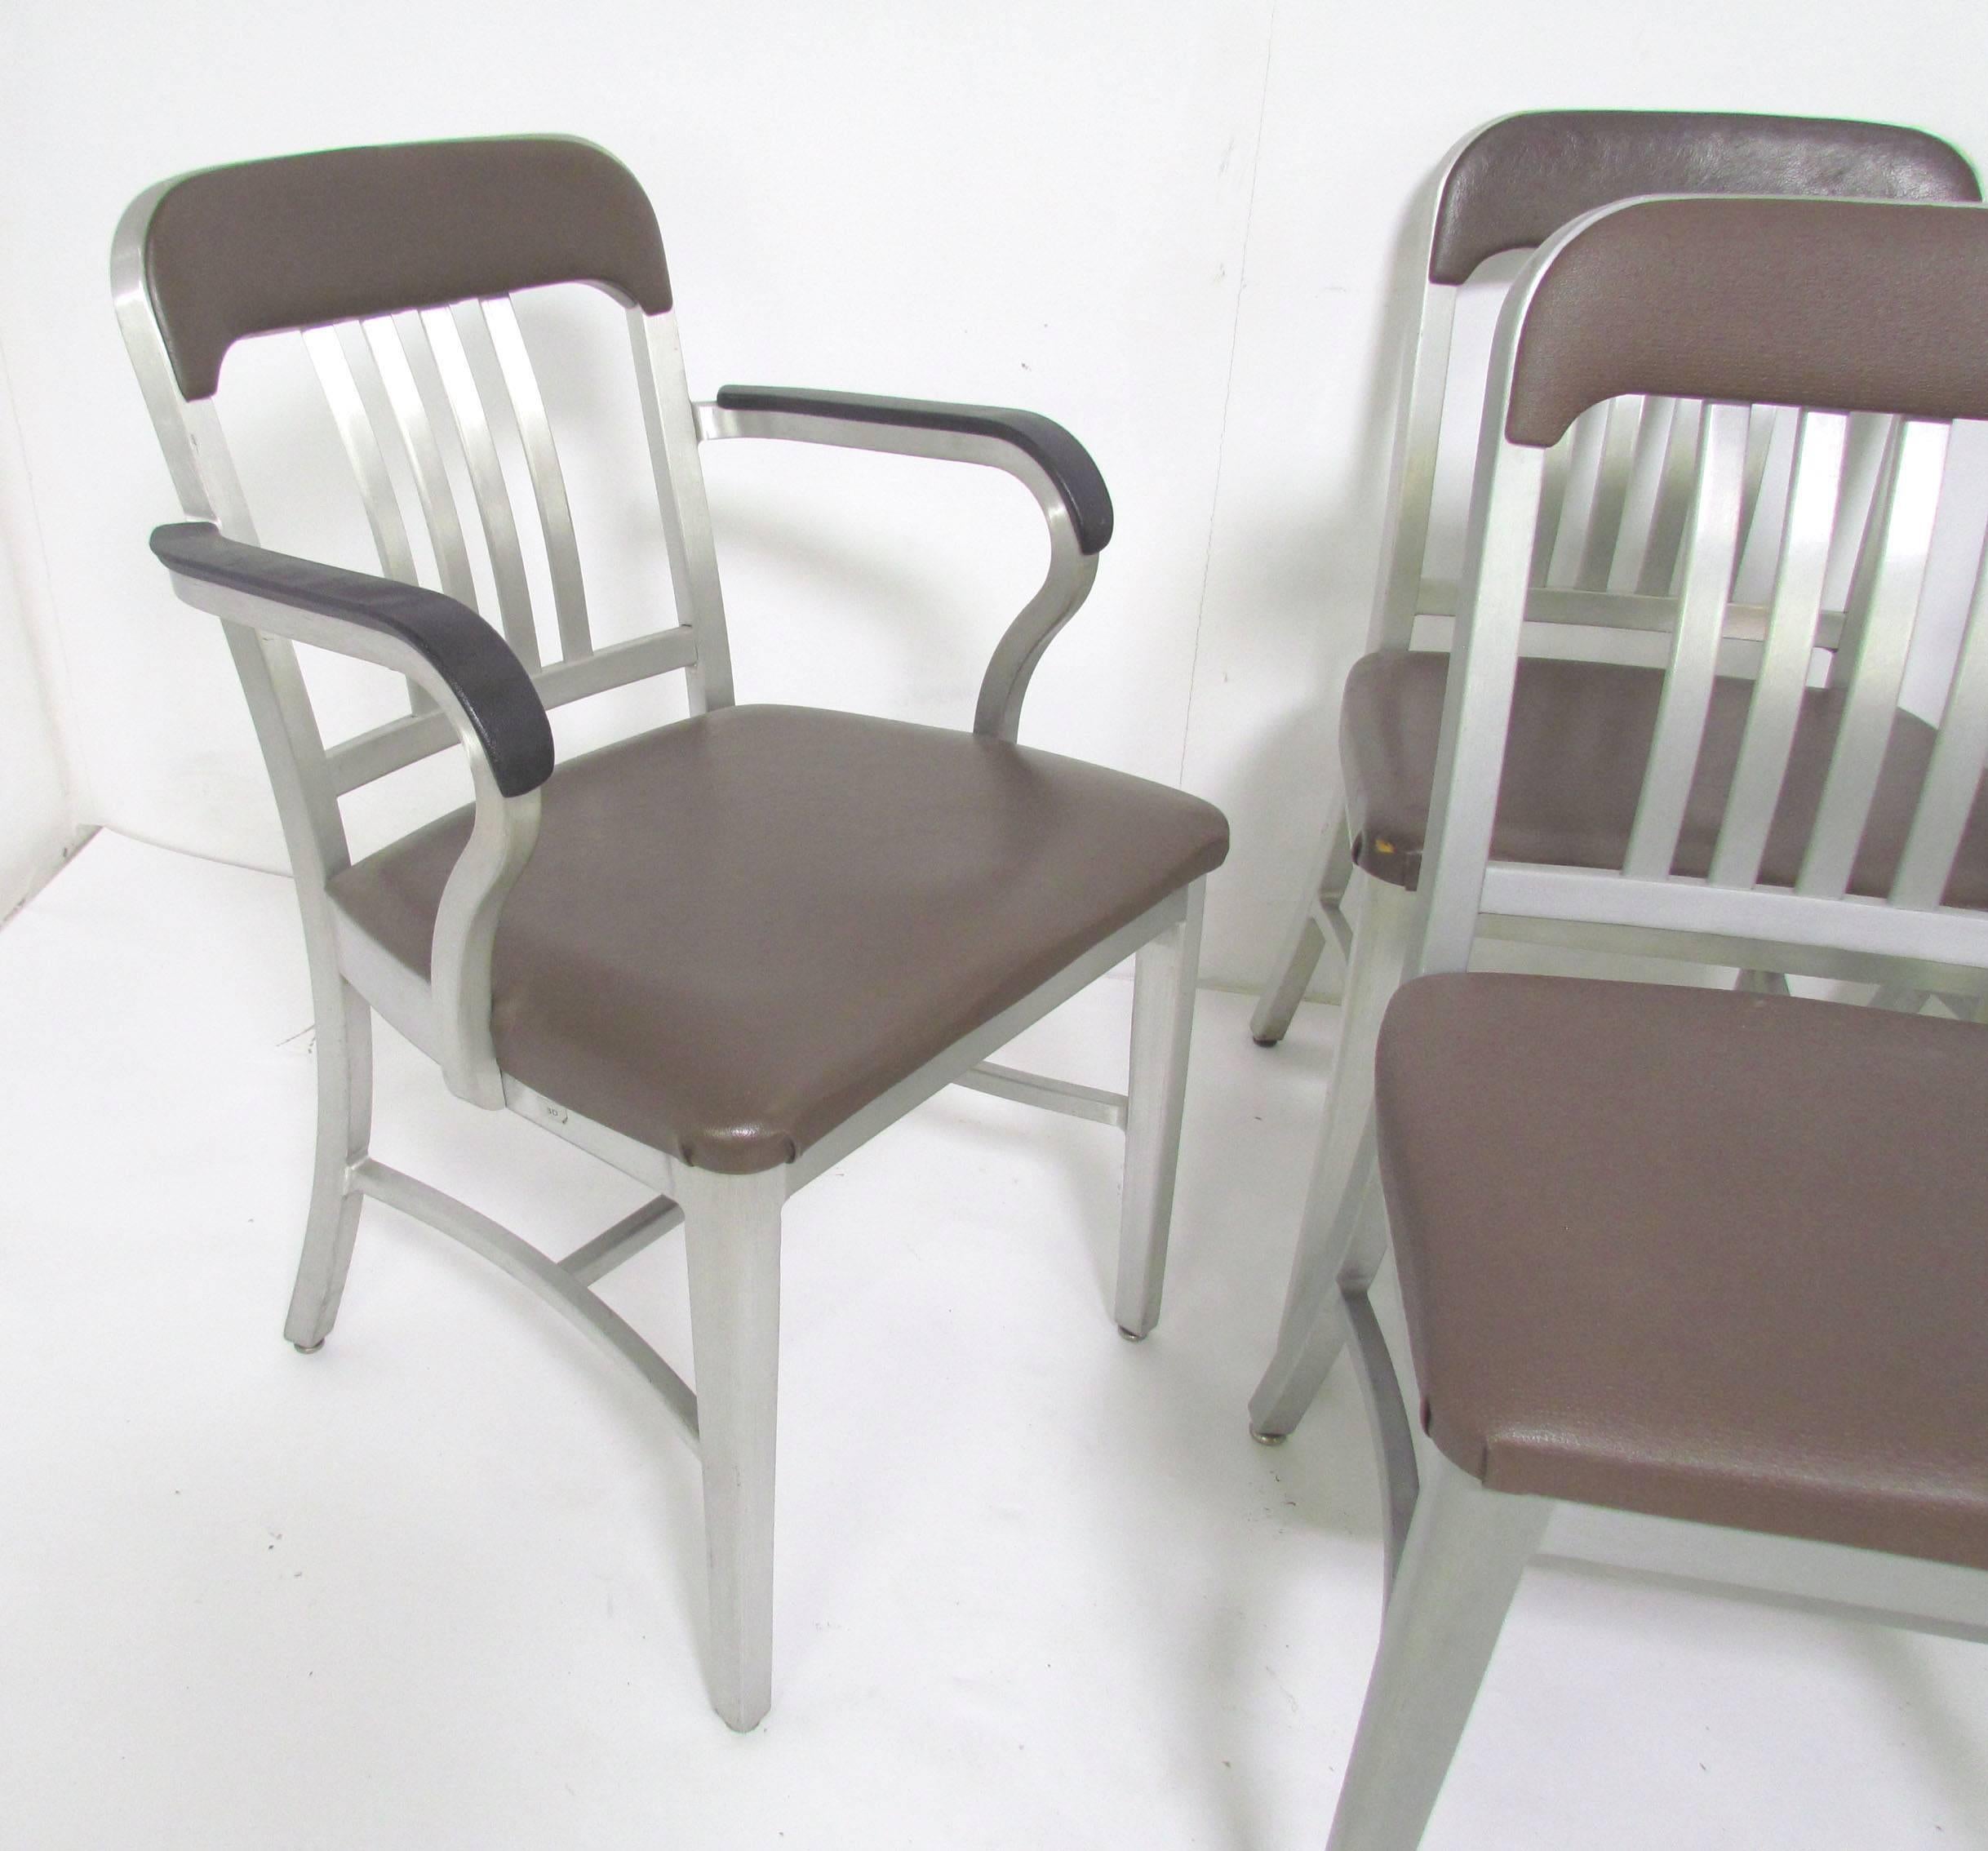 Set of six Industrial aluminum GoodForm dining chairs, by General Fireproofing. Although some have slight differences in the upholstery (and label variations), these were used as a set of dining chairs and all came from the same home.

Set